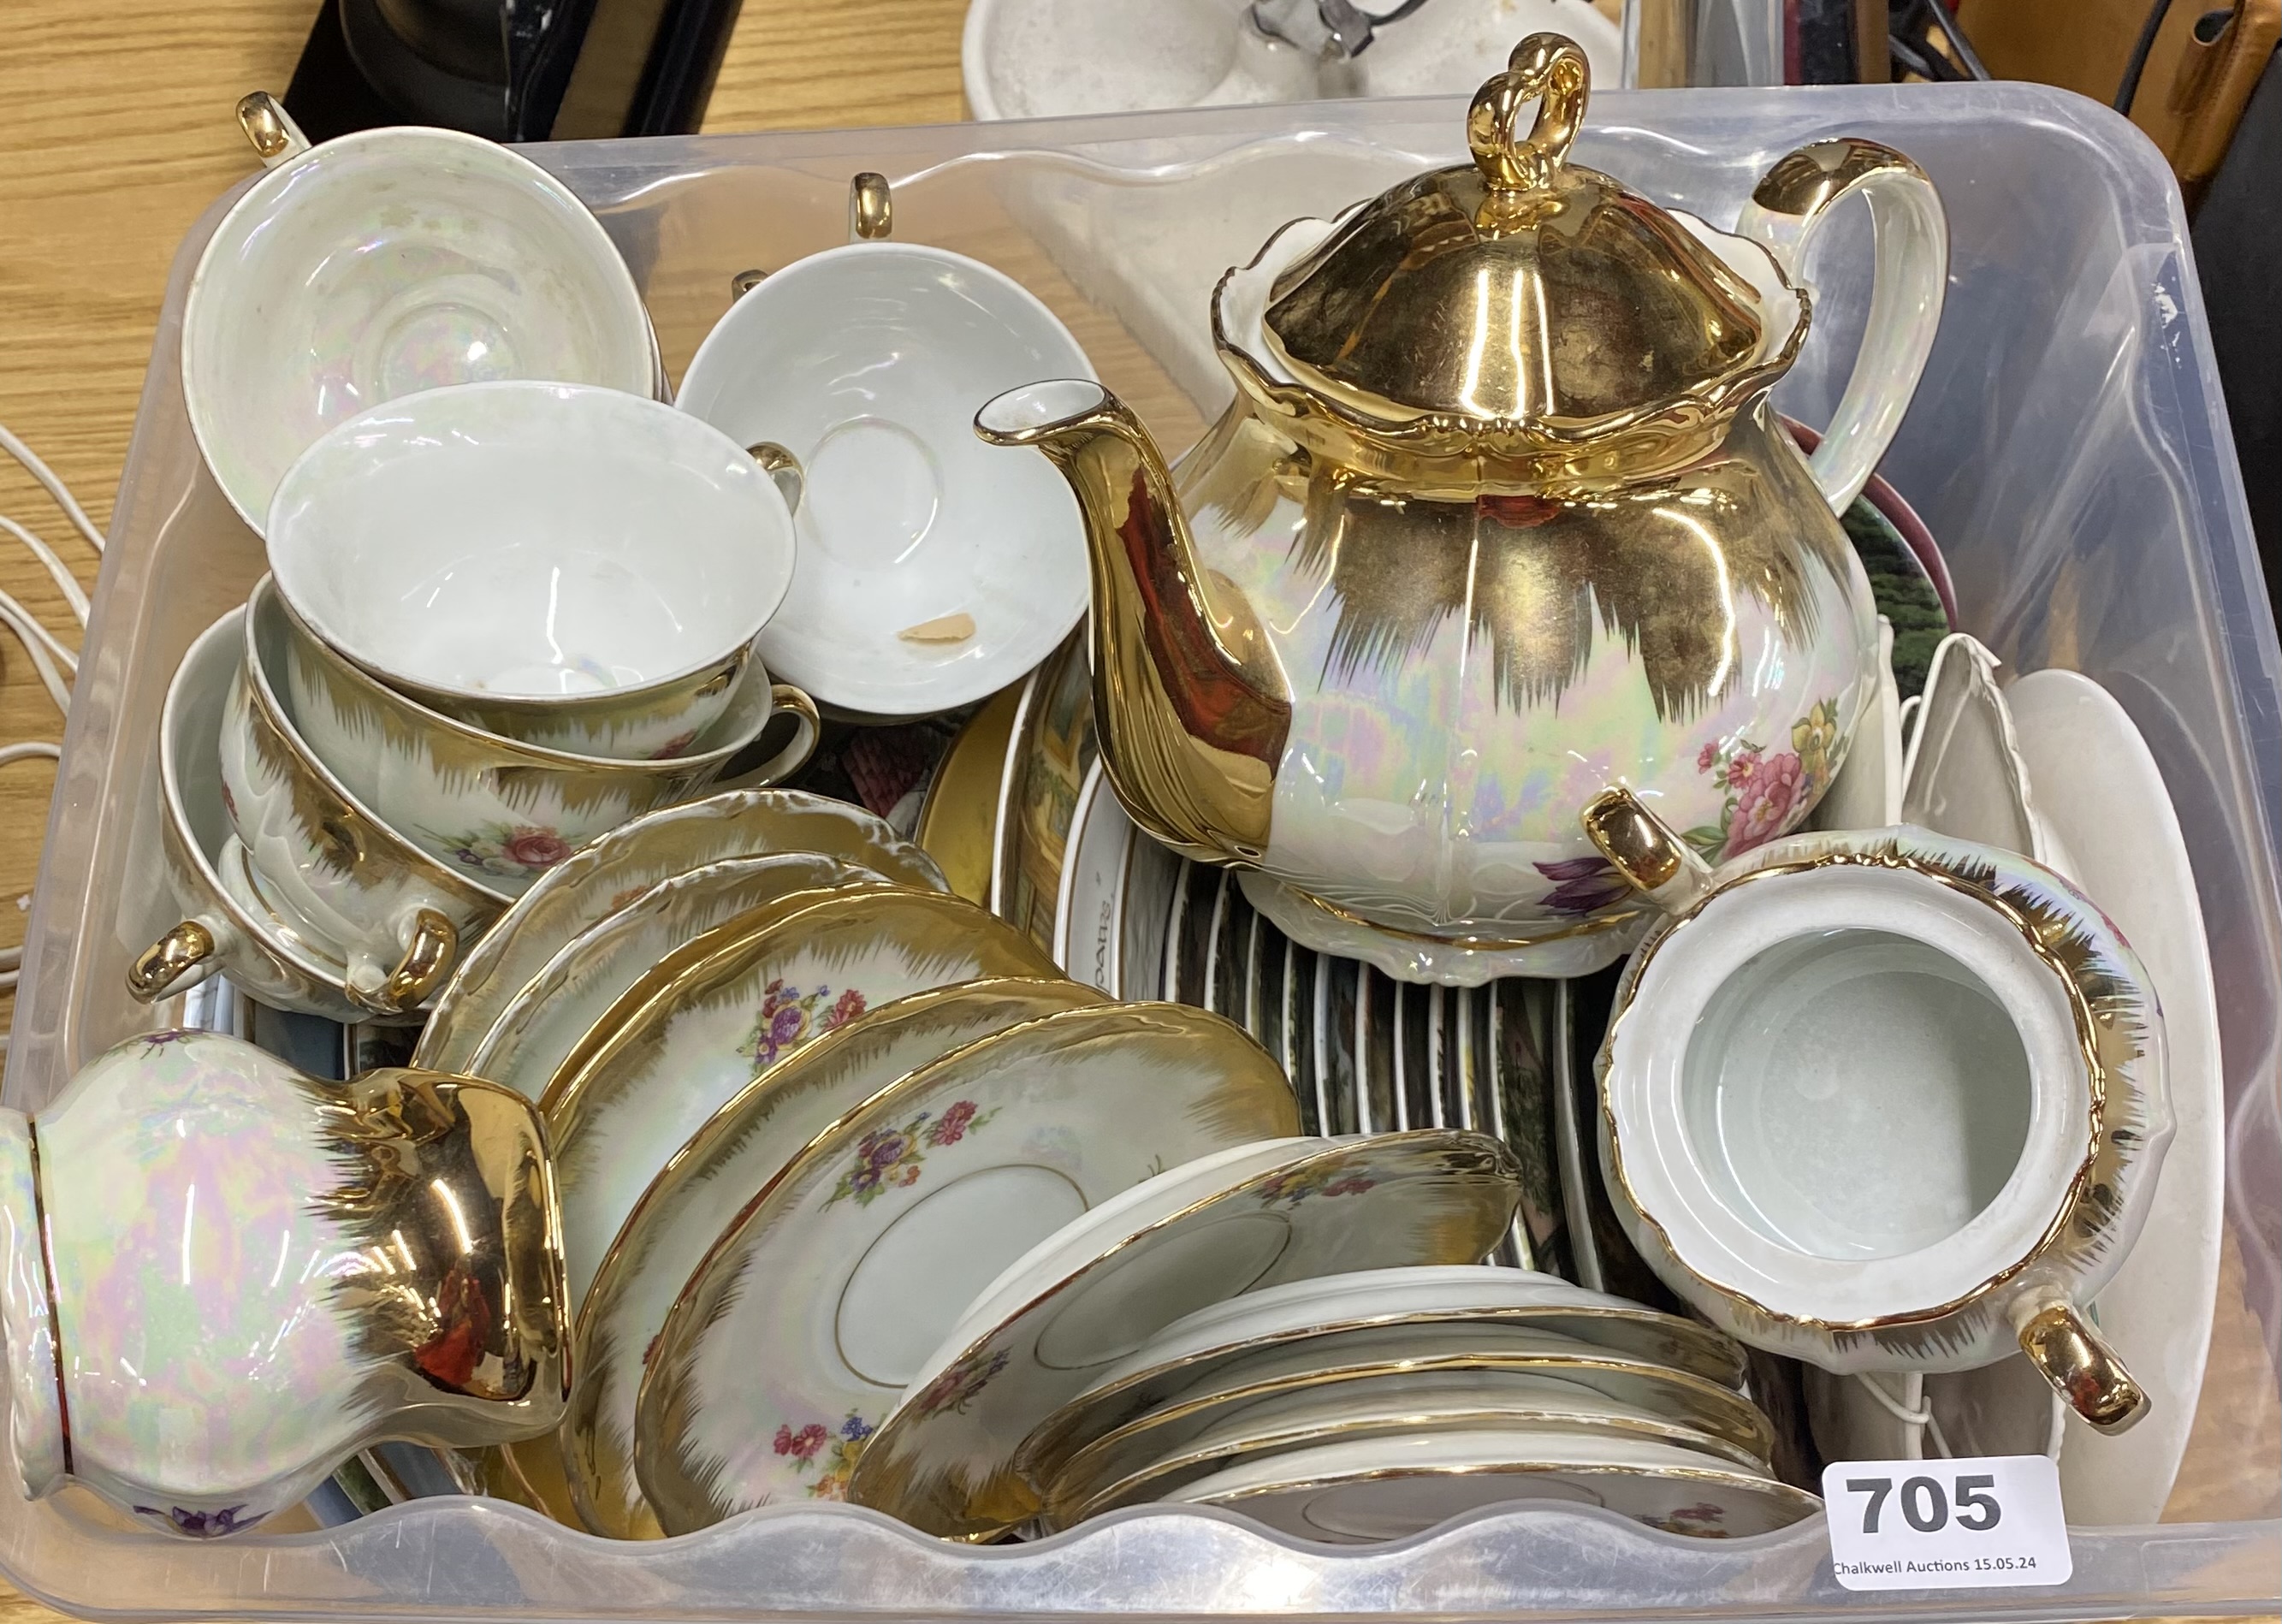 A box of good mixed china, including a lustre tea set. - Image 2 of 2